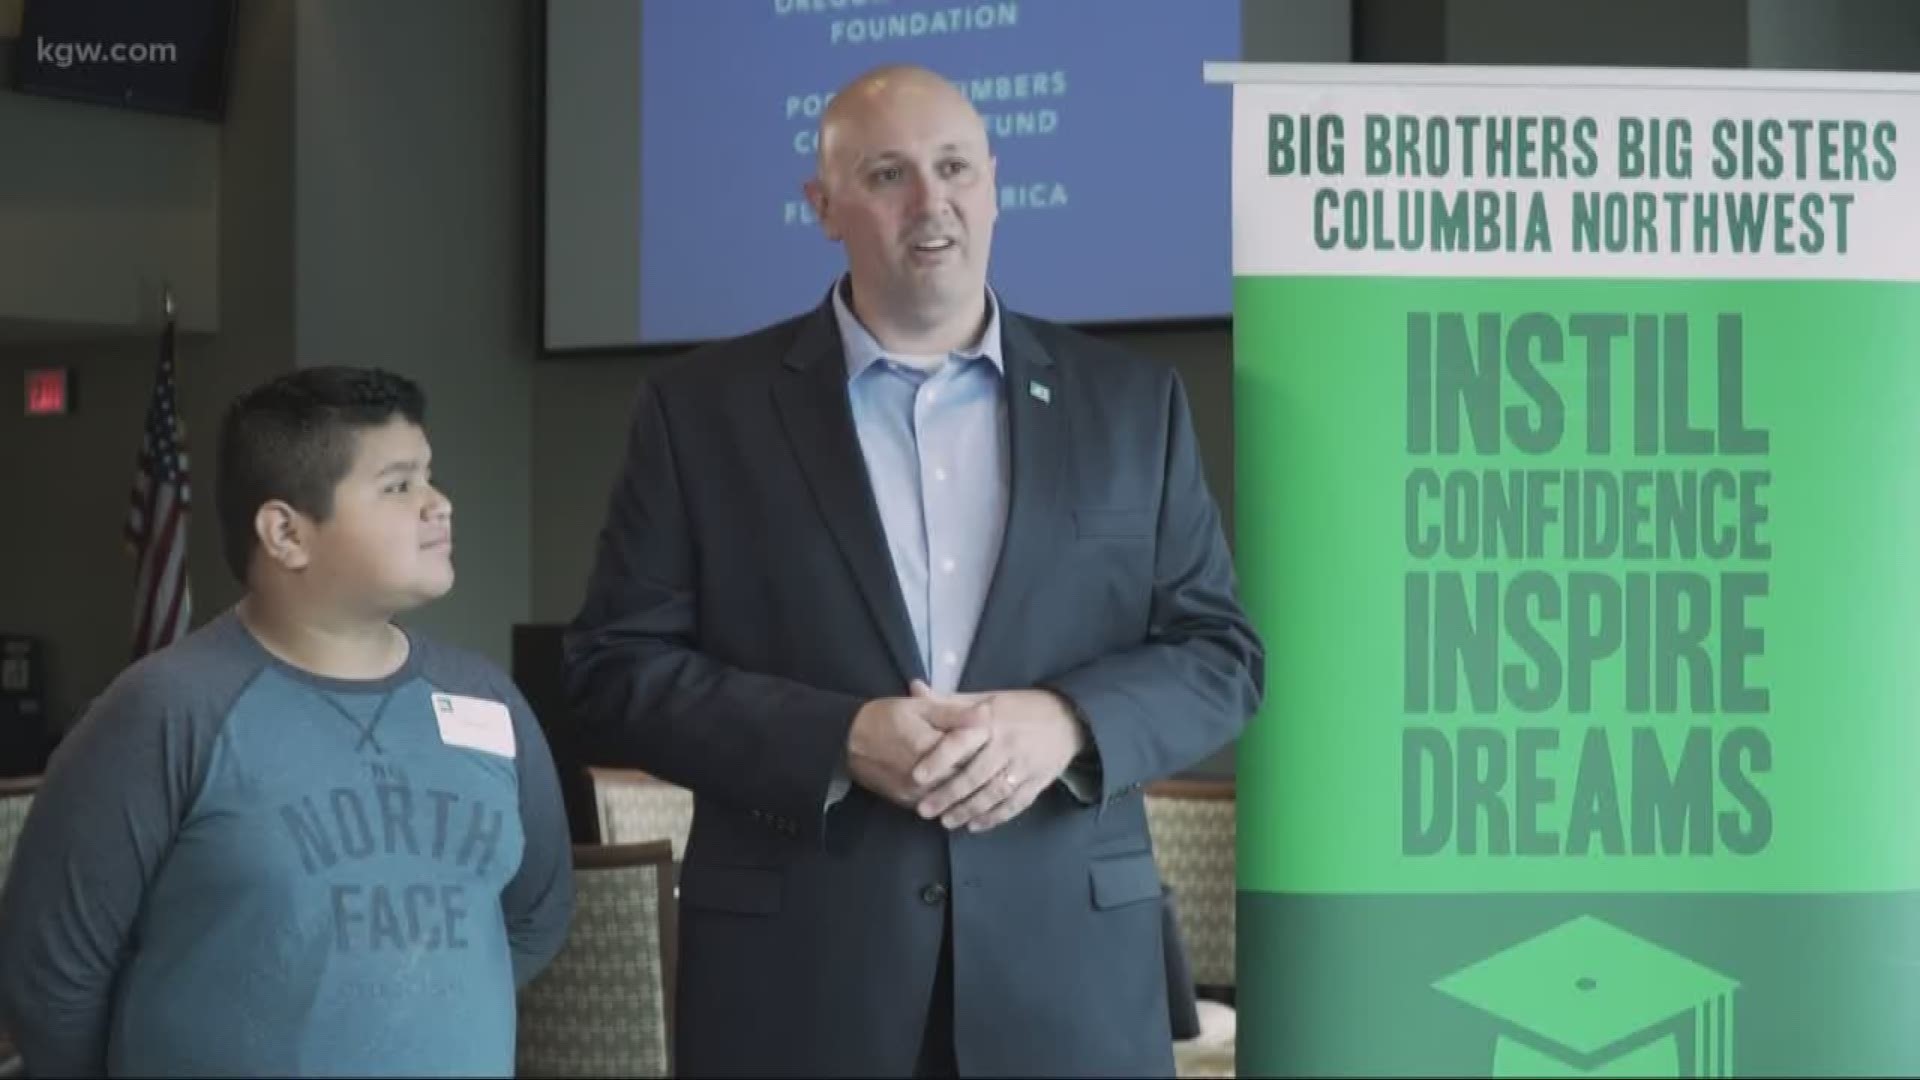 A Comcast employee was honored as Big Brother of the Year by the organization. June 22, 2018. KGW